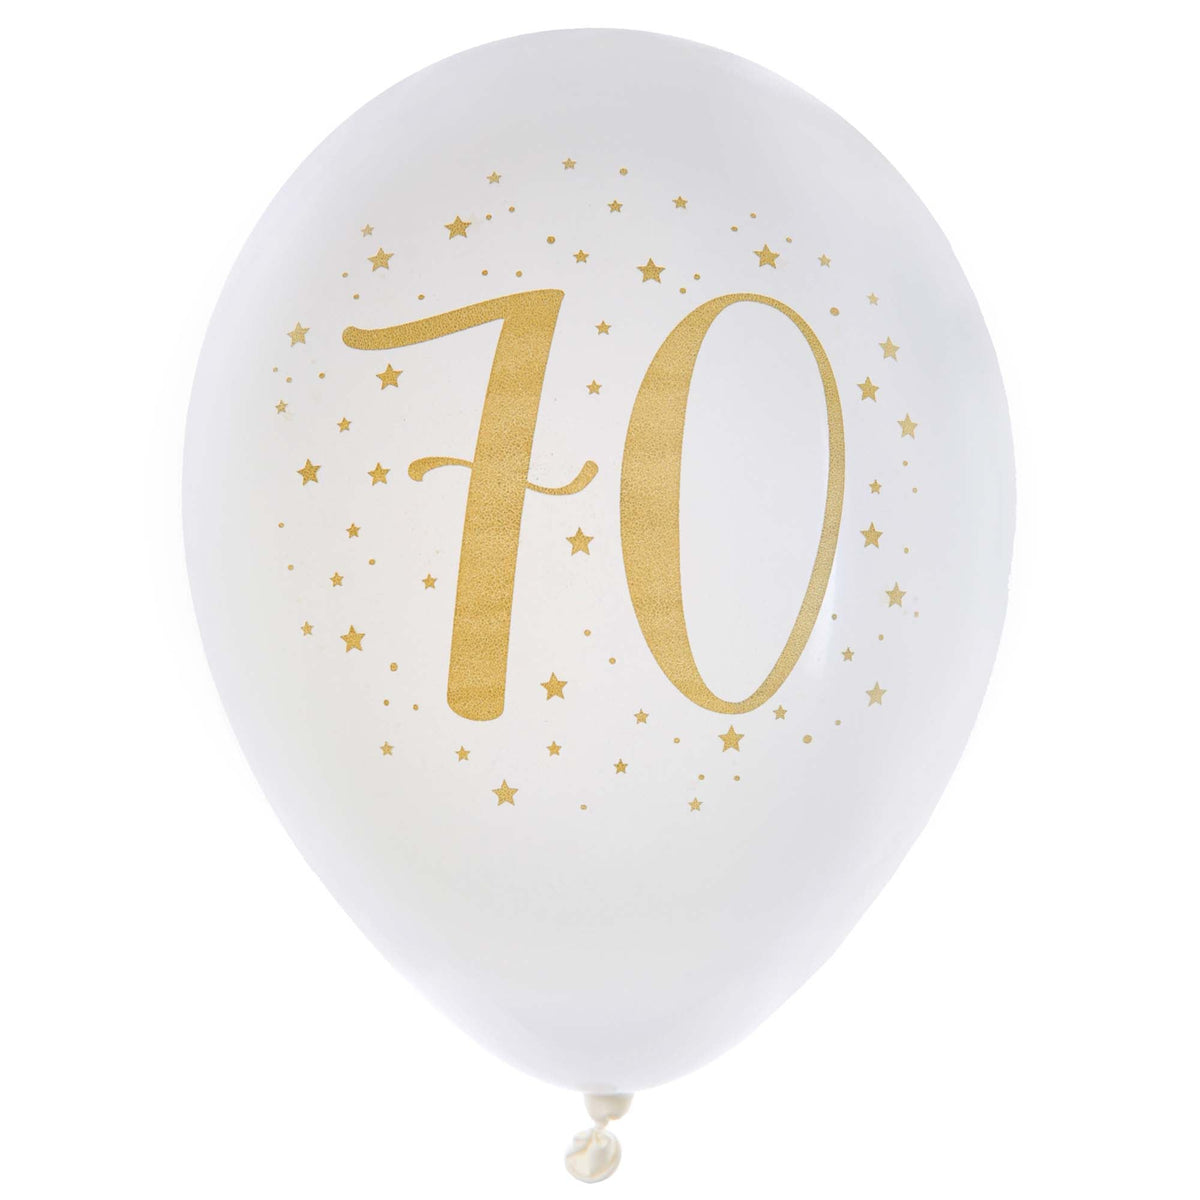 SANTEX Age Specific Birthday White and Gold 70th Birthday Latex Balloons, 12 Inches, 6 Count 3660380050995